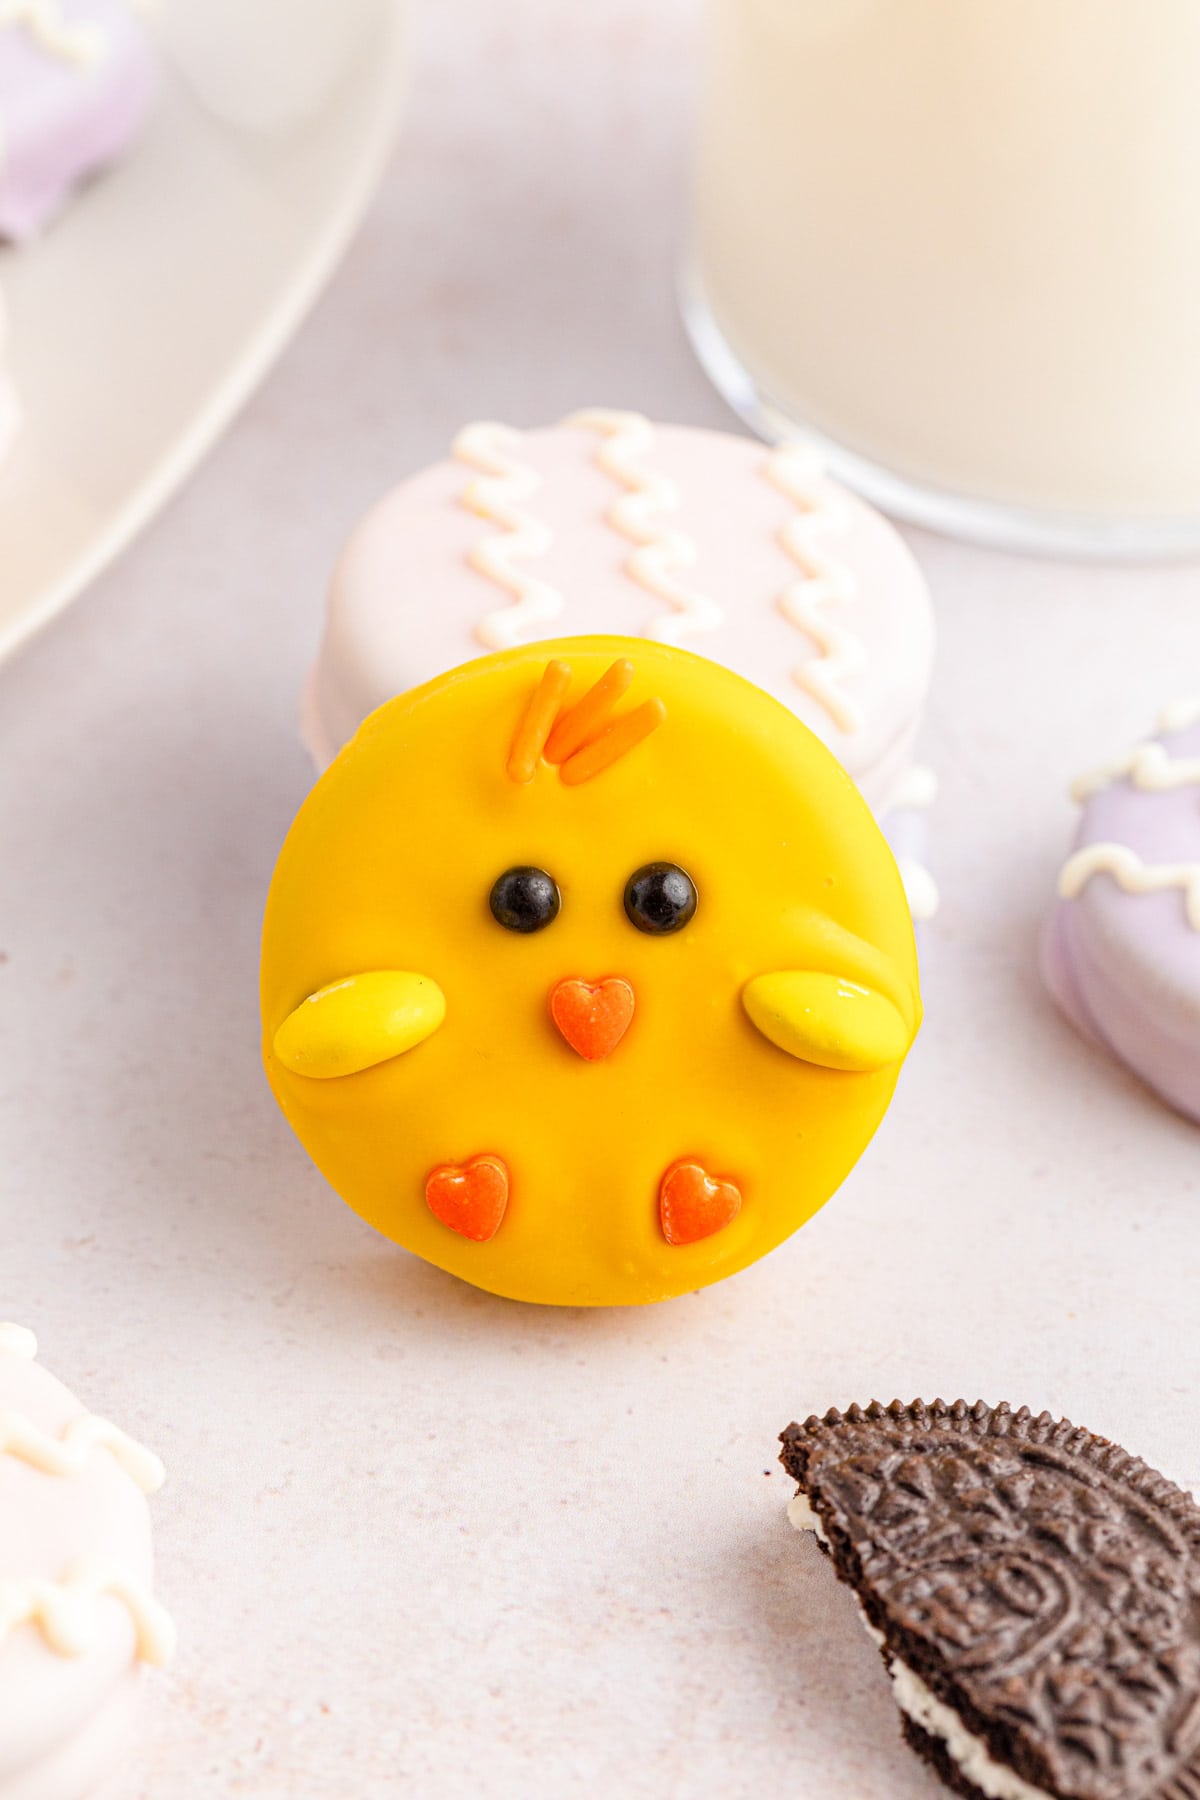 Easter Oreo chick up close with broken Oreo